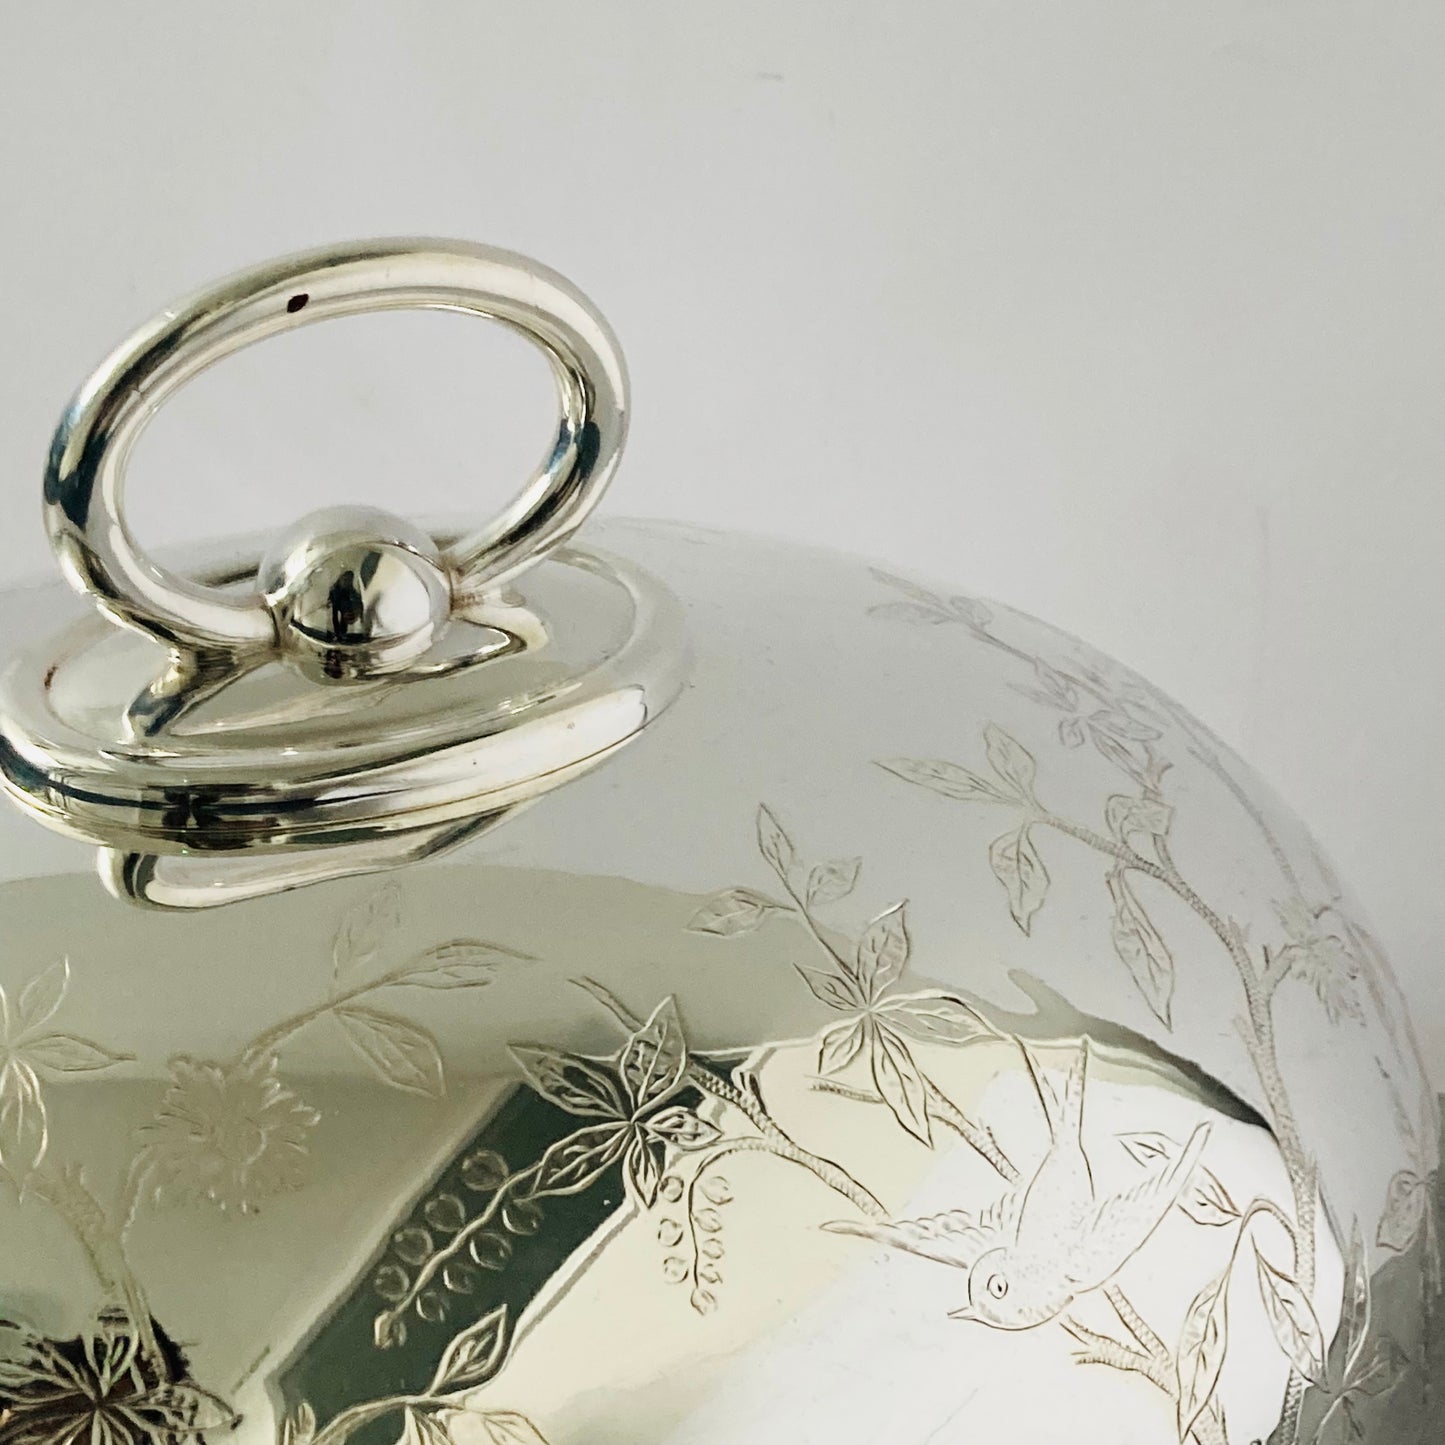 The Director Jessica - Antique Fully Engraved Silver Cloche / Food Dome